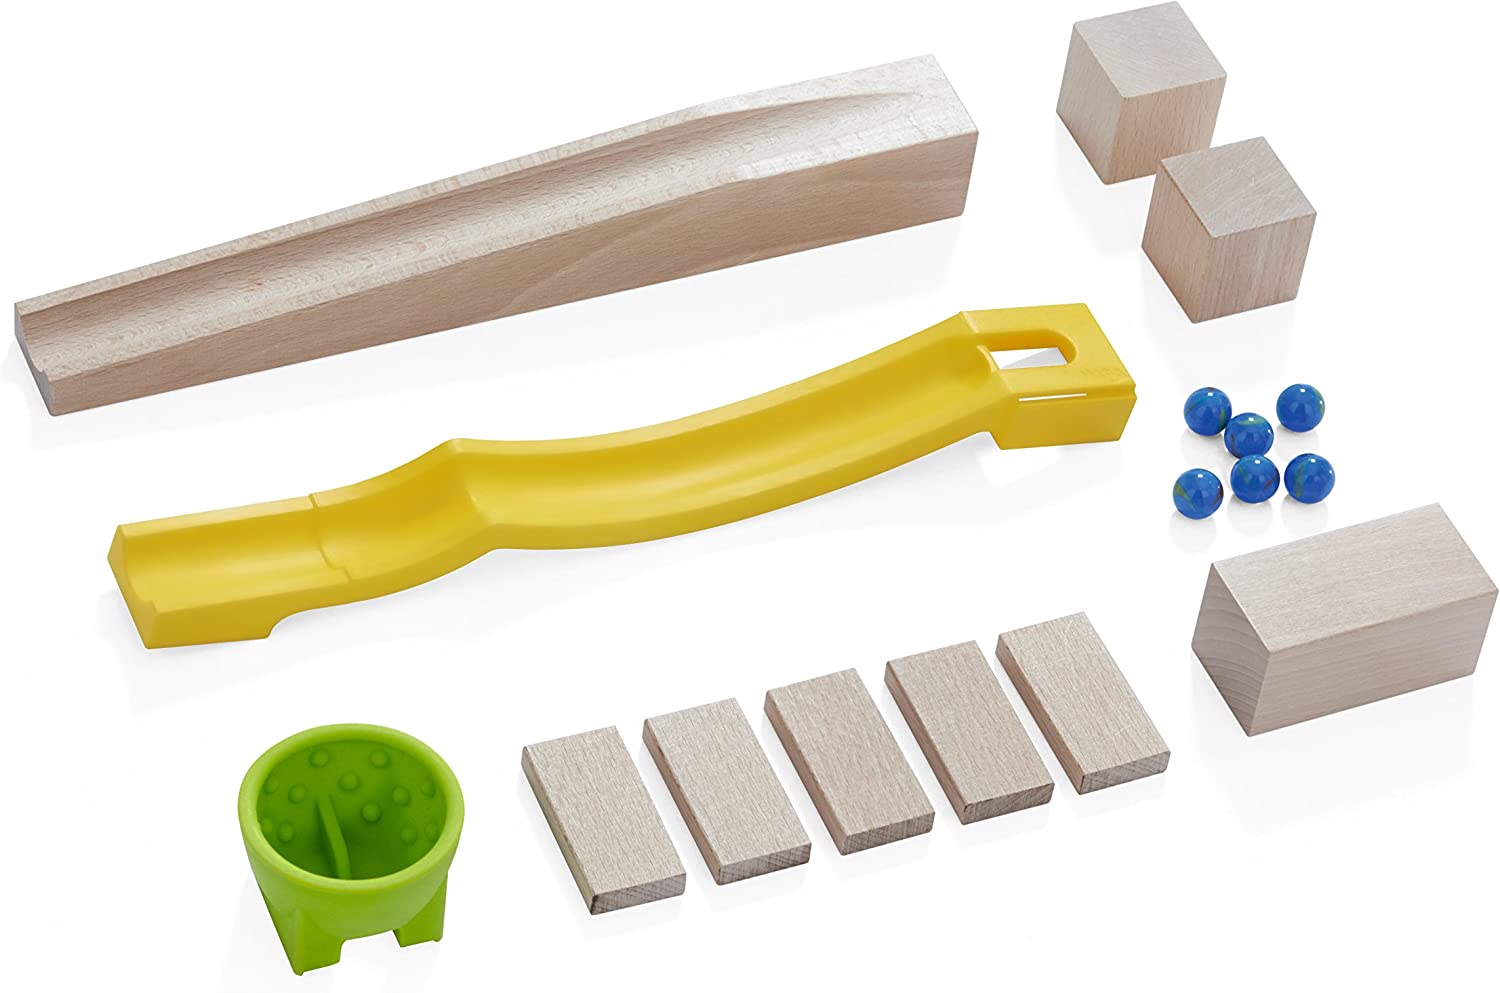 HABA Ball track complementary set - HABA wooden playset for science learning - wooden toys at The Toy Room